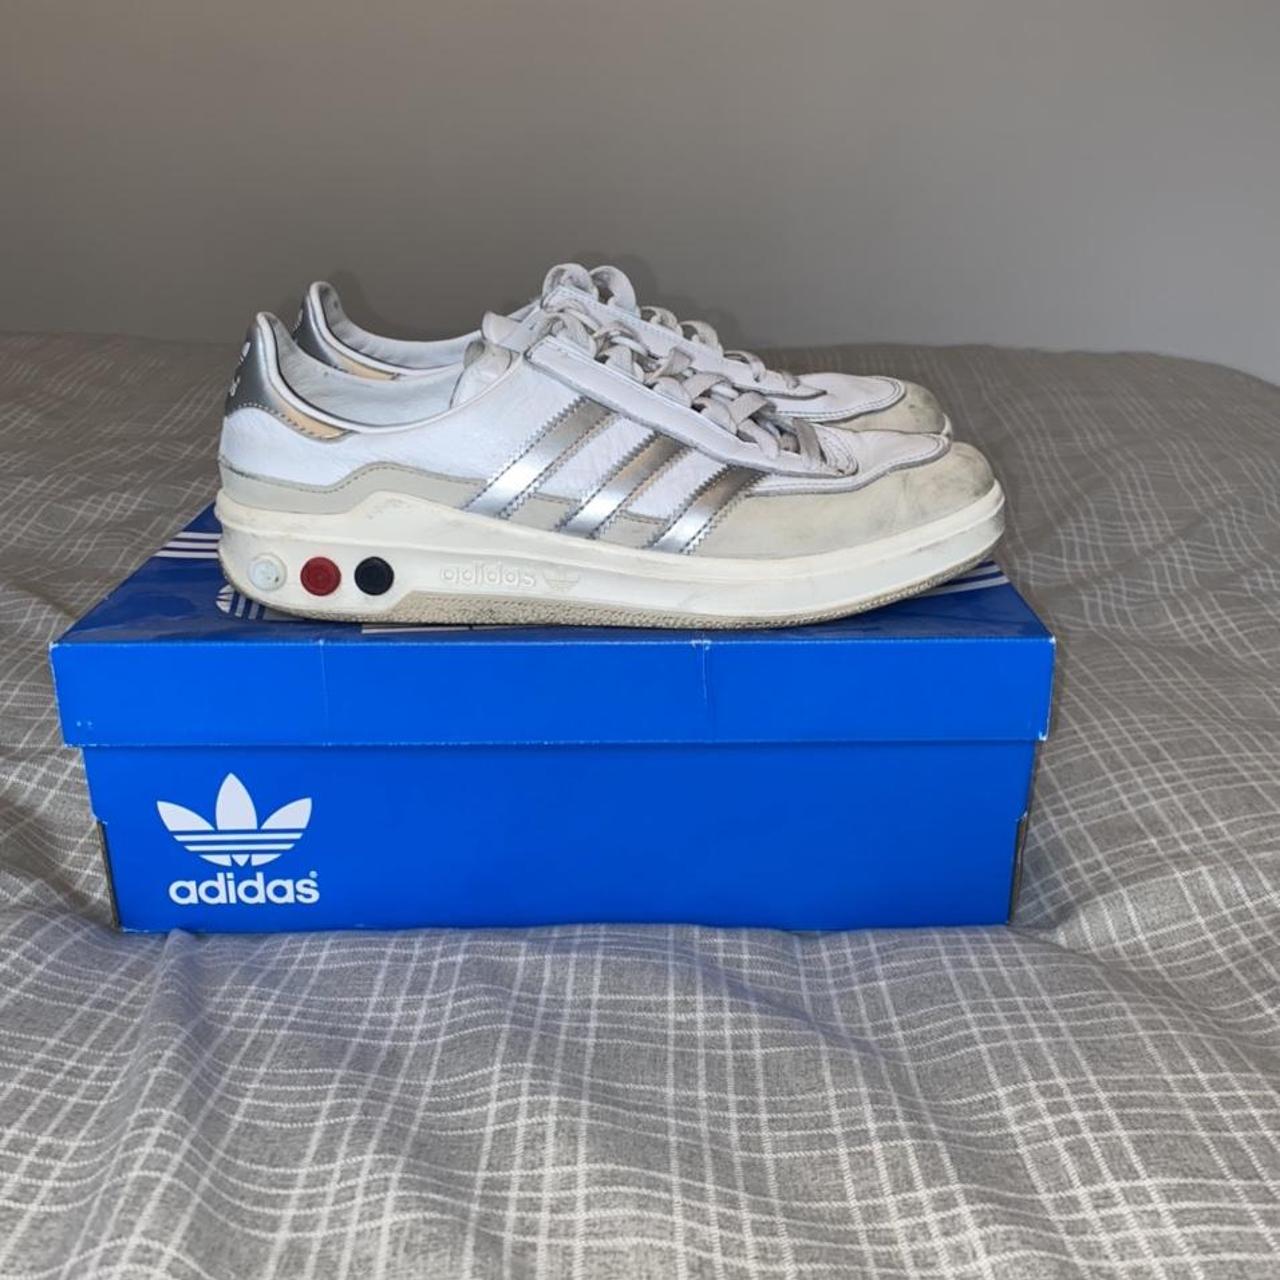 Encouragement Impossible strategy Adidas glxy spzl Great pair of trainers Dead stock... - Depop